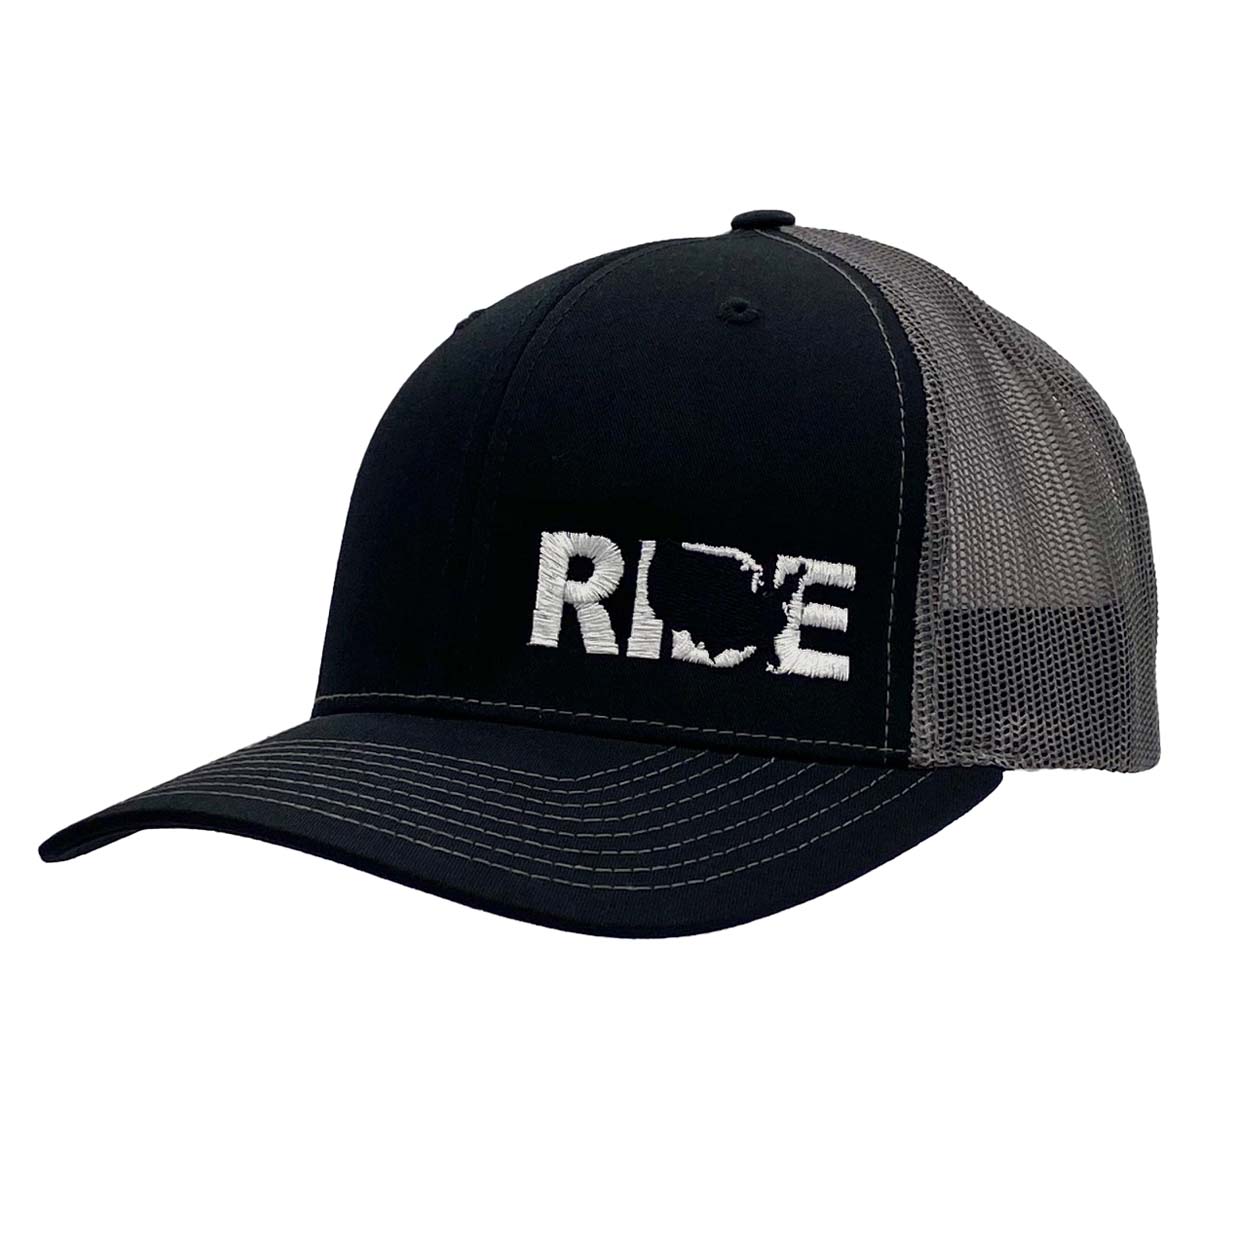 Ride United States Night Out Embroidered Snapback Trucker Hat Black/Gray